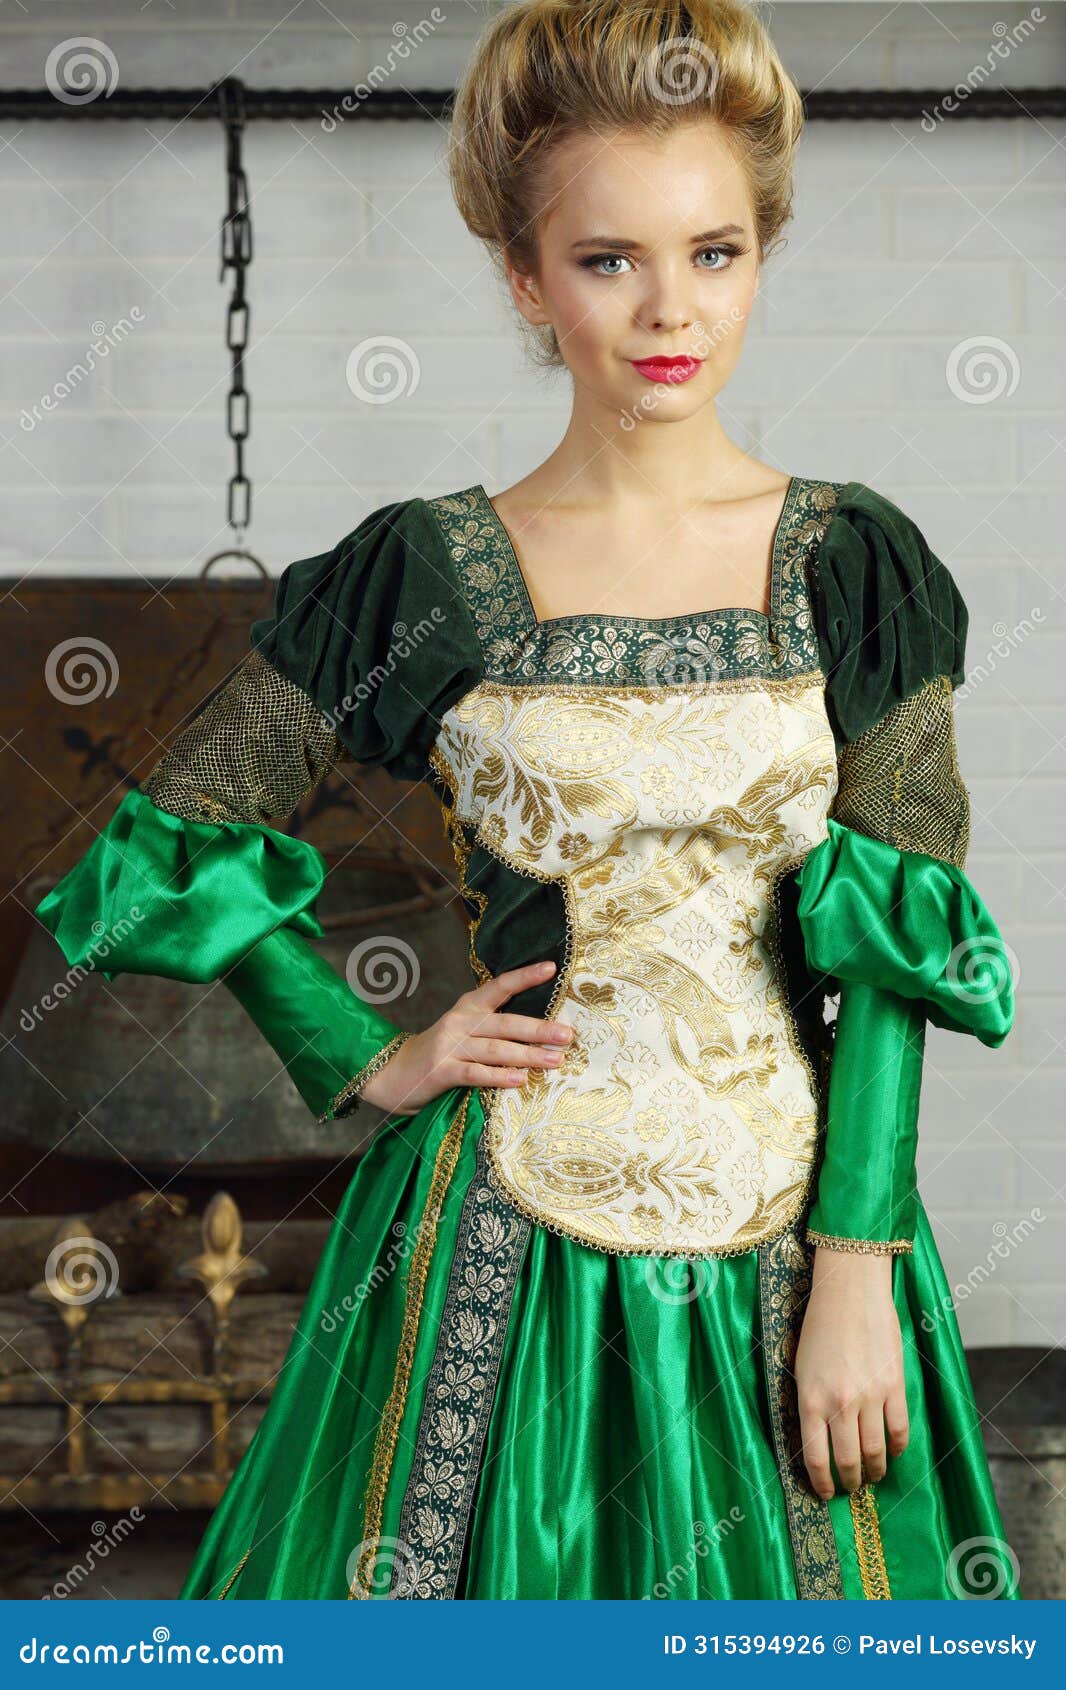 beautiful woman in green medieval costume stands